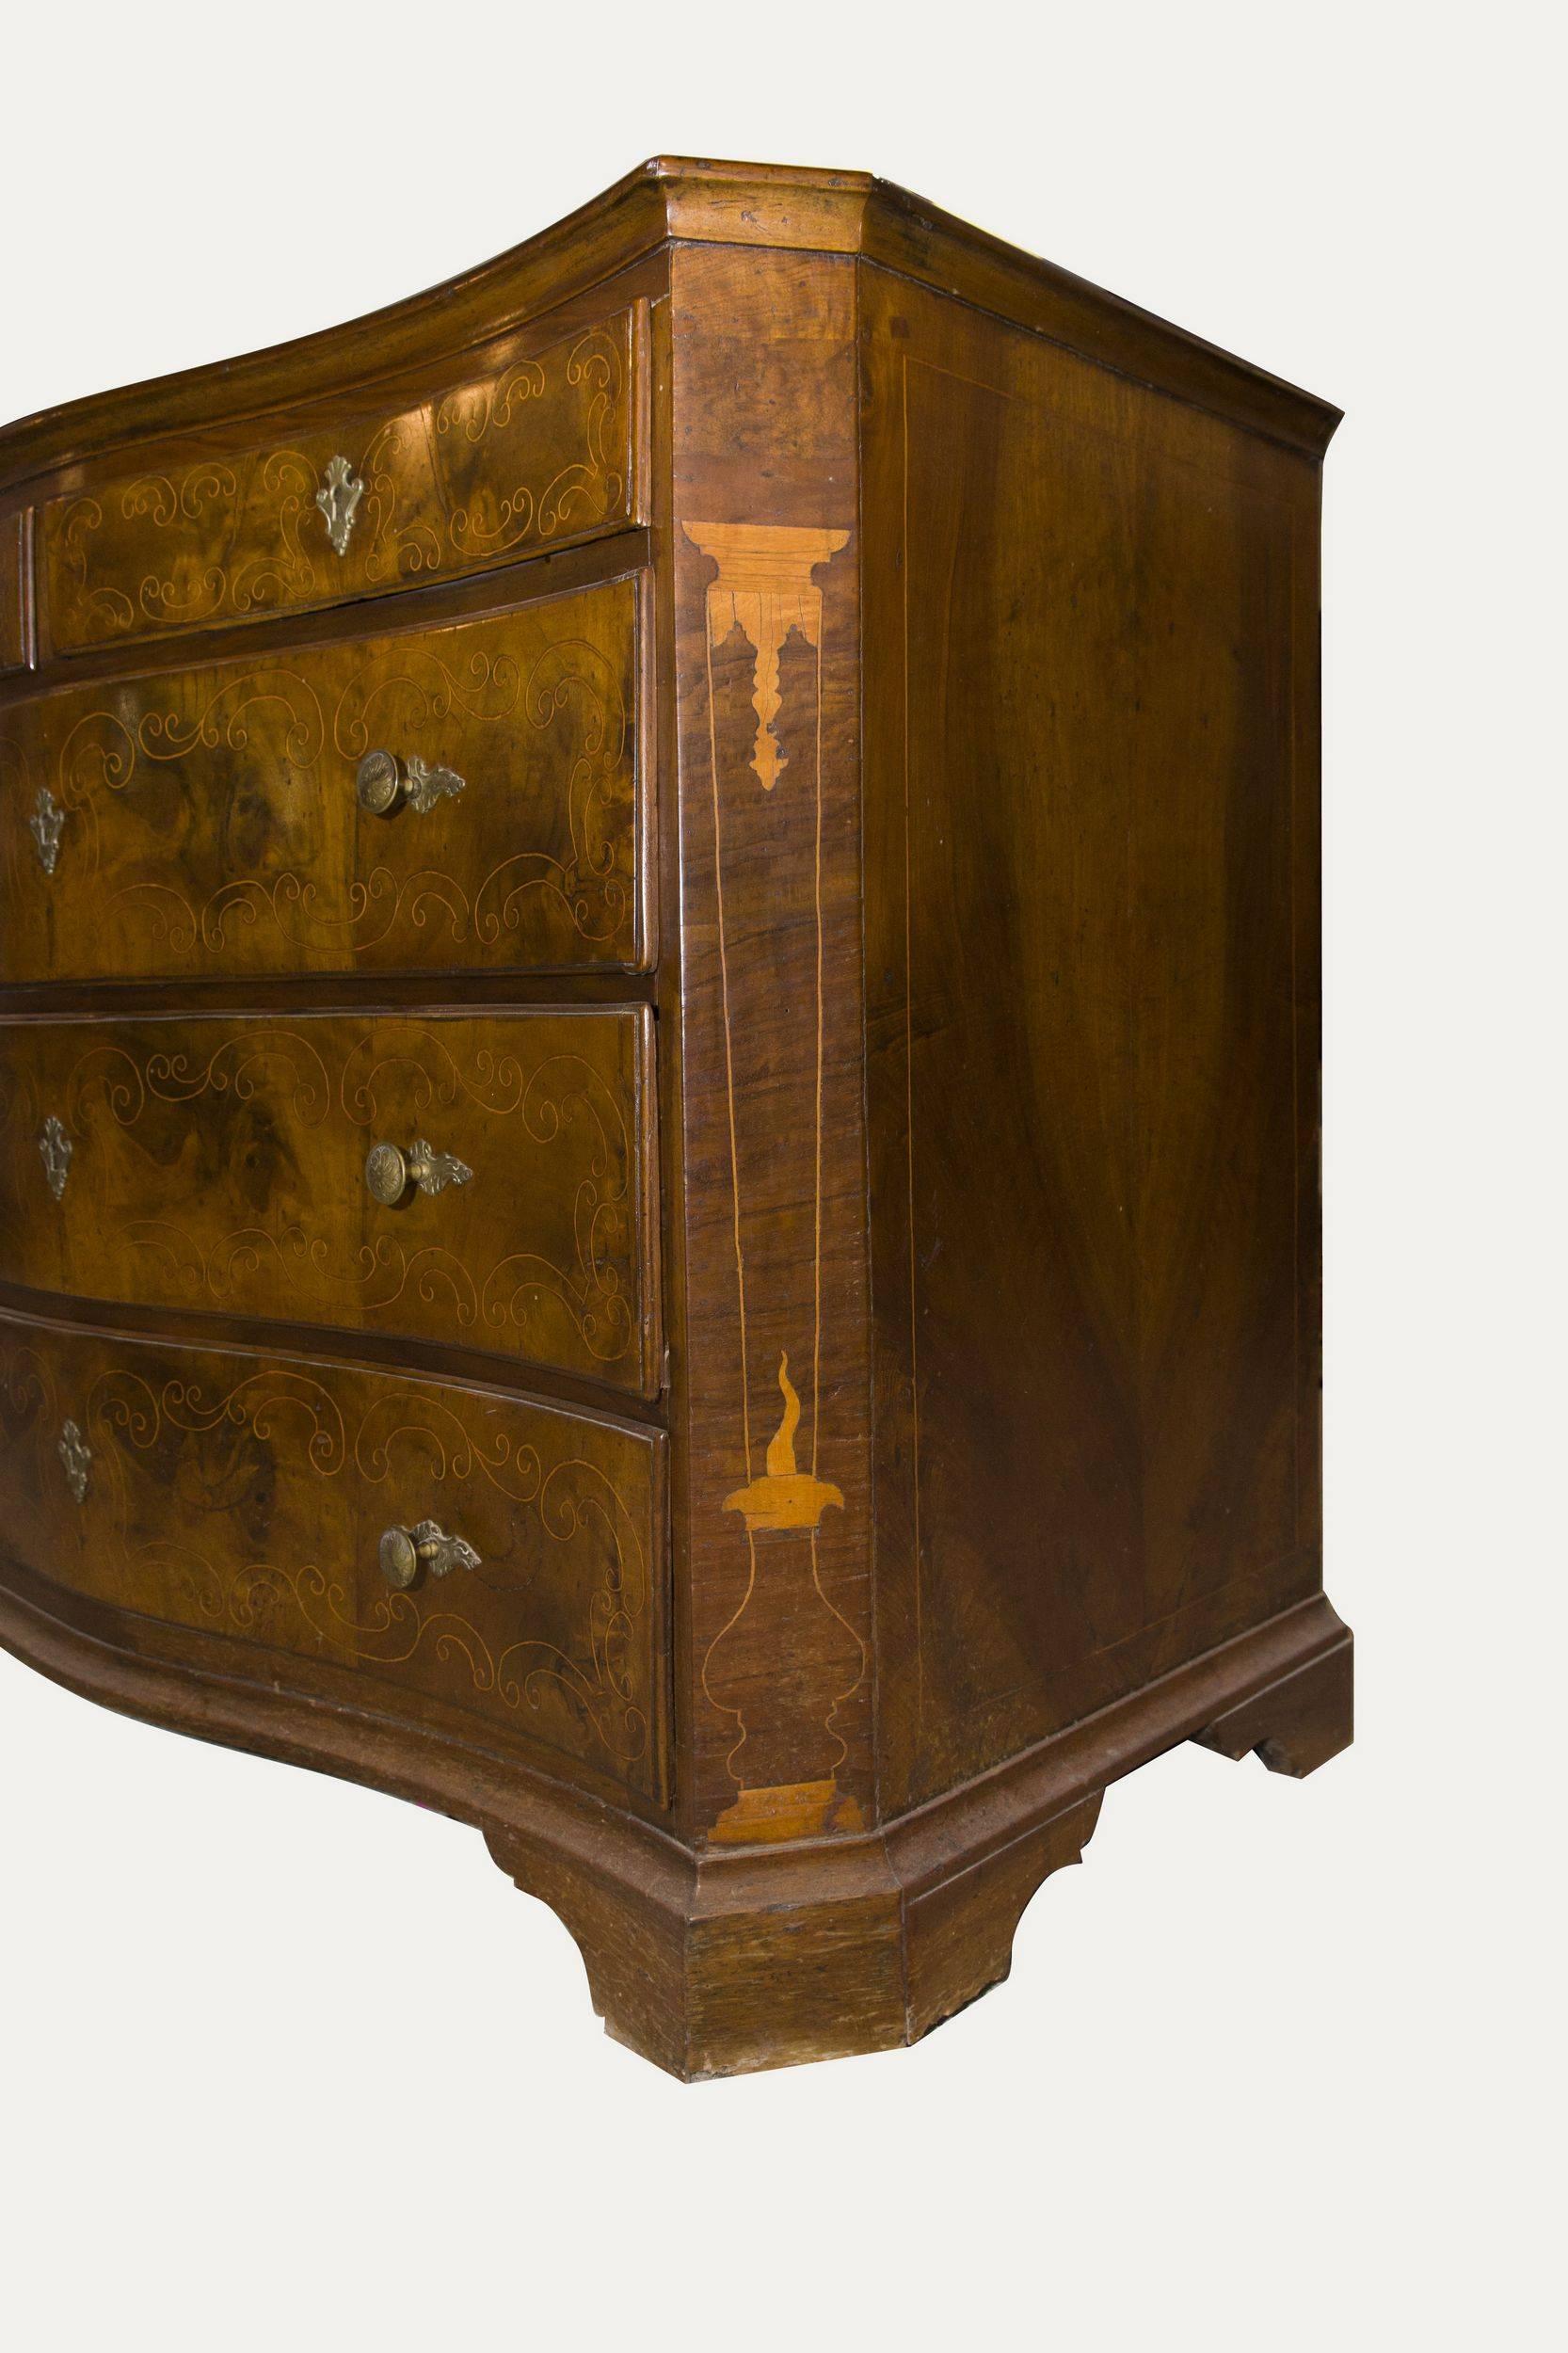 Exquisite chest of drawers walnut finely inlaid in lighter wood, serpentine front, bracket feet. Naples, half of 18th century.

PLEASE NOTE THAT THE EXPORT AUTHORIZATION BY THE ITALIAN MINISTRY OF CULTURAL HERITAGE TAKES ABOUT SIX WEEKS

